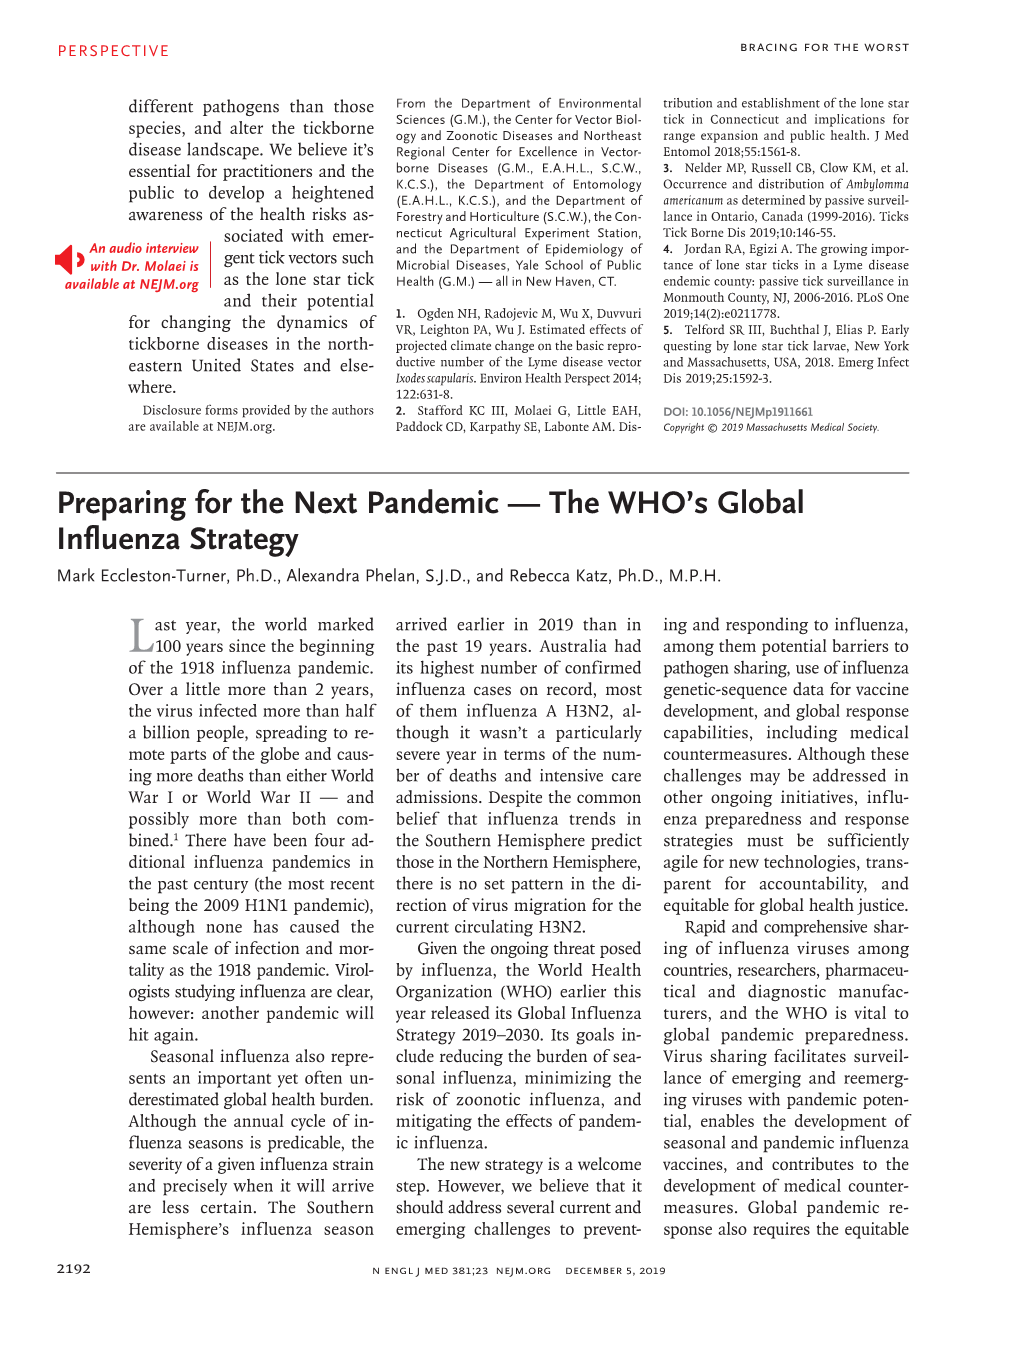 Preparing for the Next Pandemic — the WHO's Global Influenza Strategy